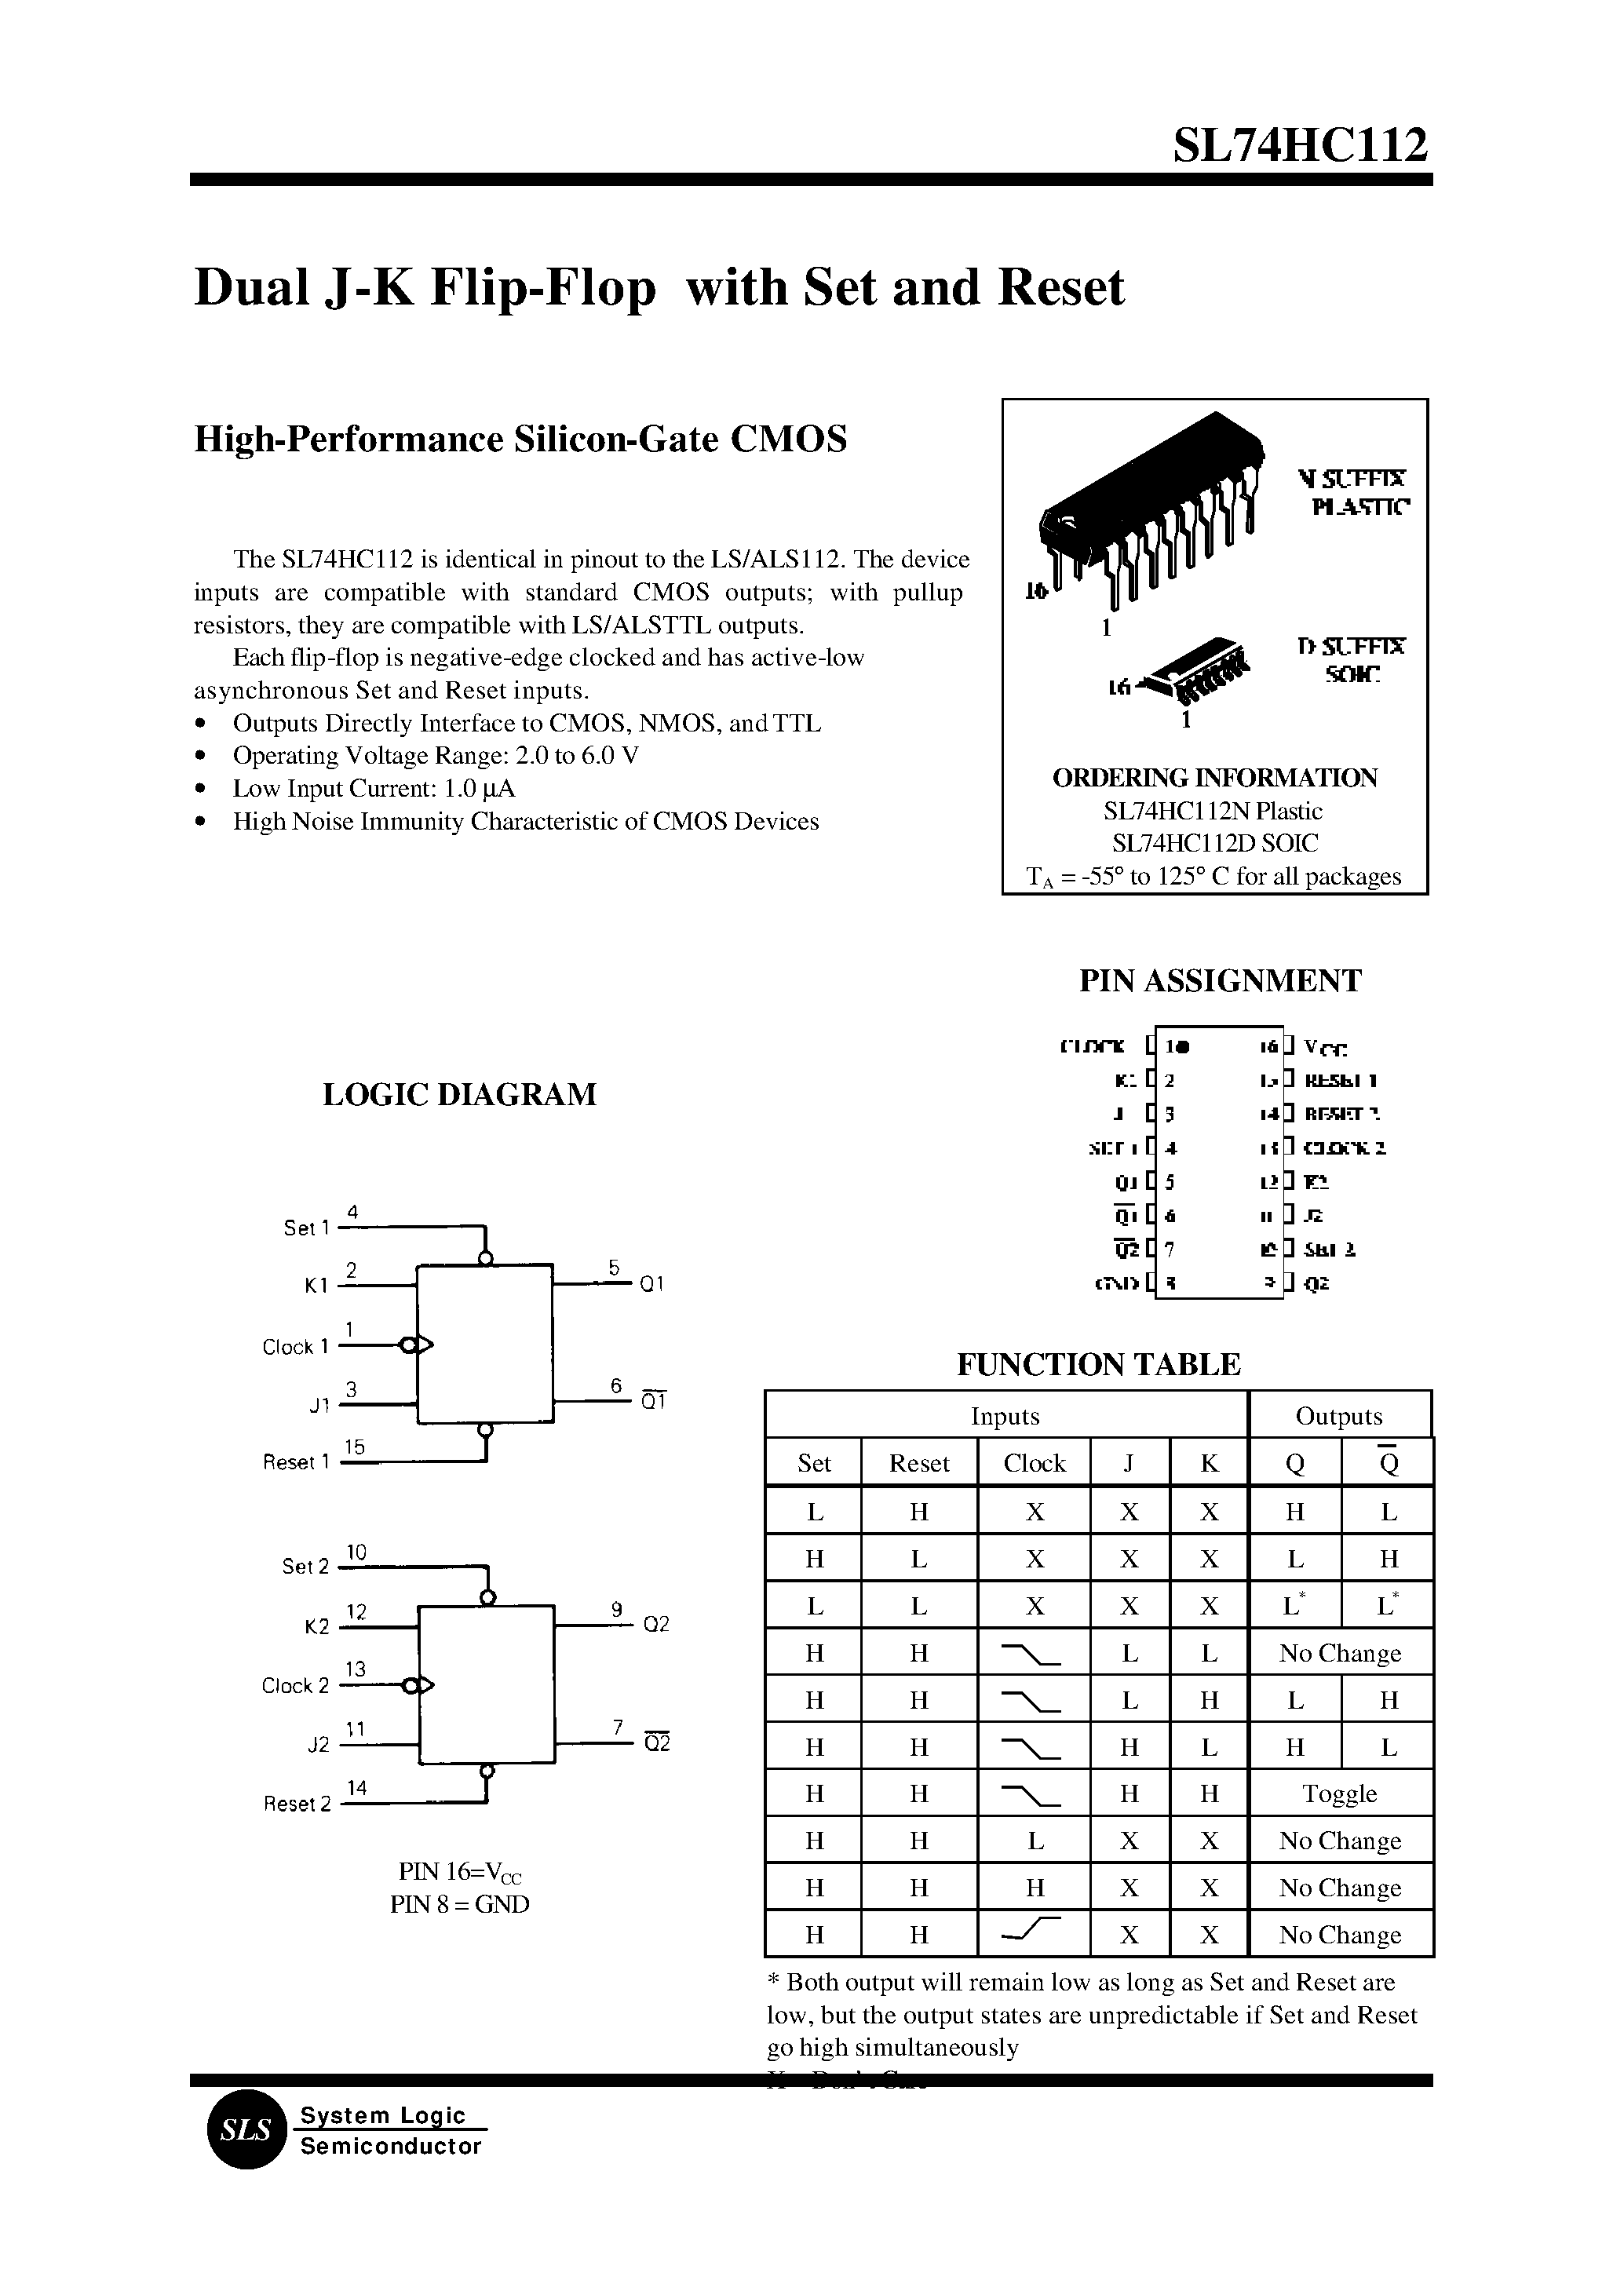 Datasheet SL74HC112 - Dual J-K Flip-Flop with Set and Reset page 1